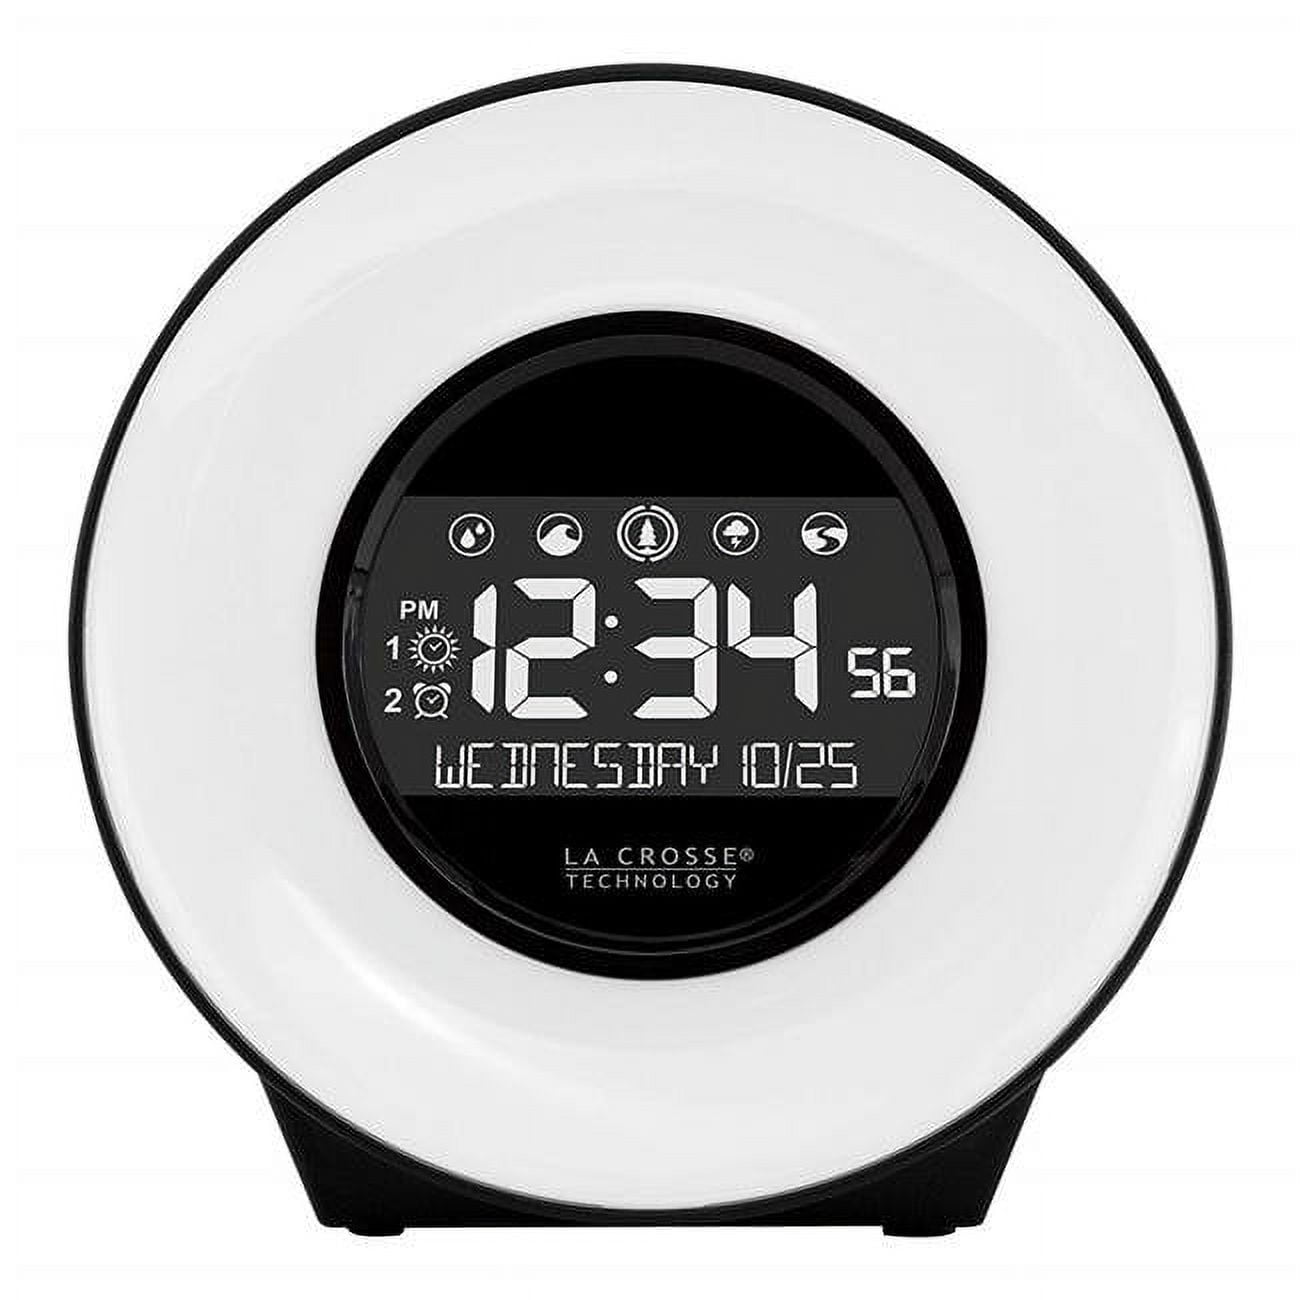 Light alarm clock with nature sounds and colour changing mood light MOOD  LIGHT